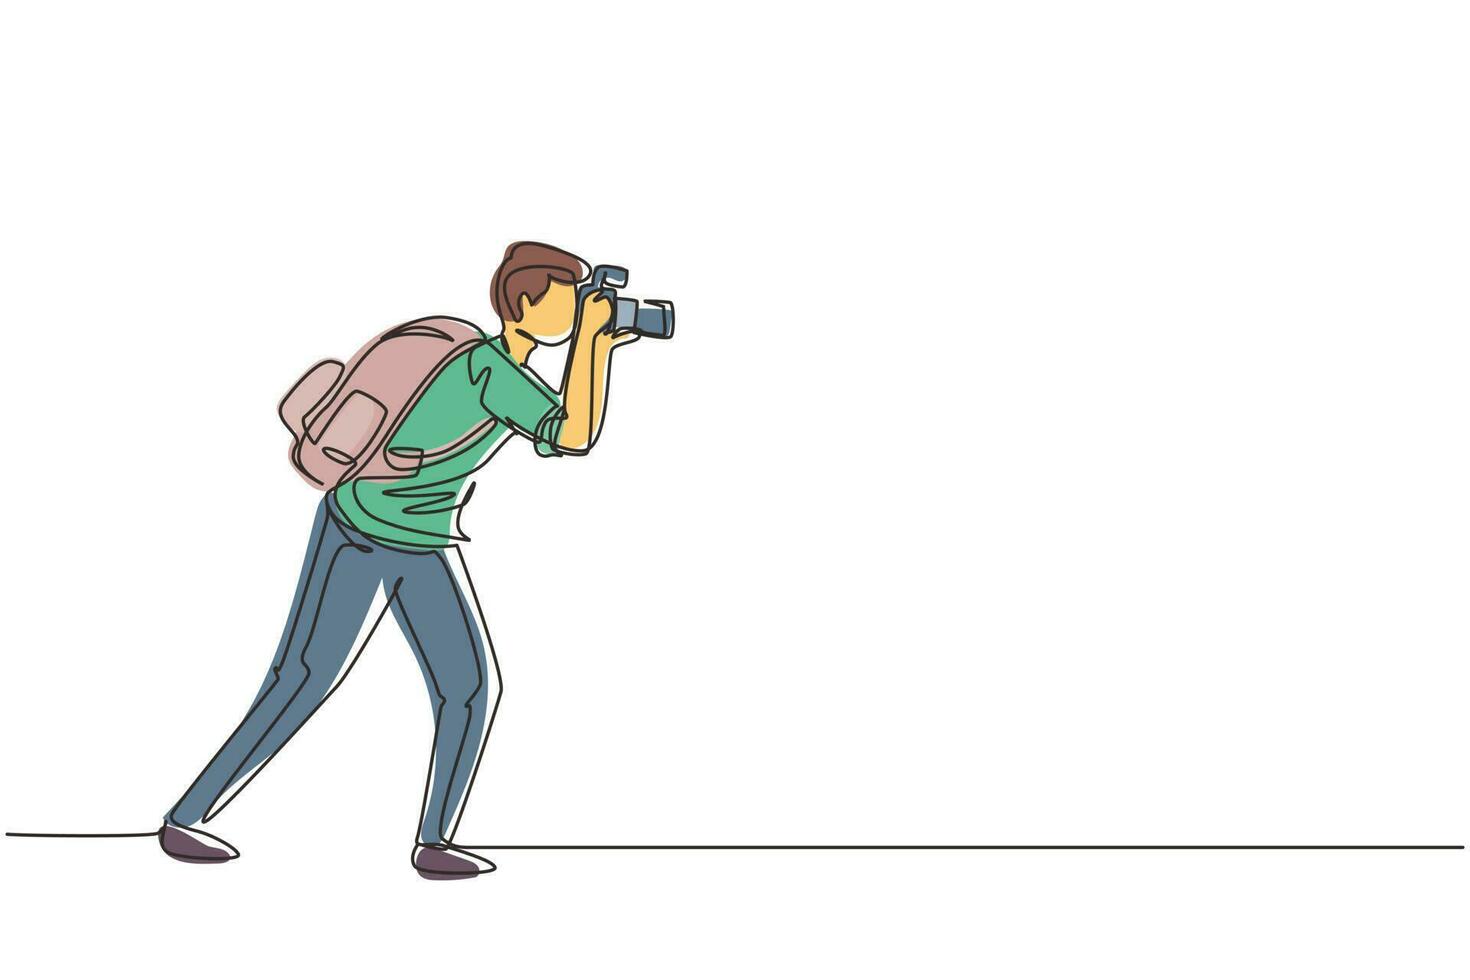 Single one line drawing journalist or reporter with backpack making pictures. Photographers of paparazzi taking photo with digital cameras dslr. Continuous line draw design graphic illustration vector